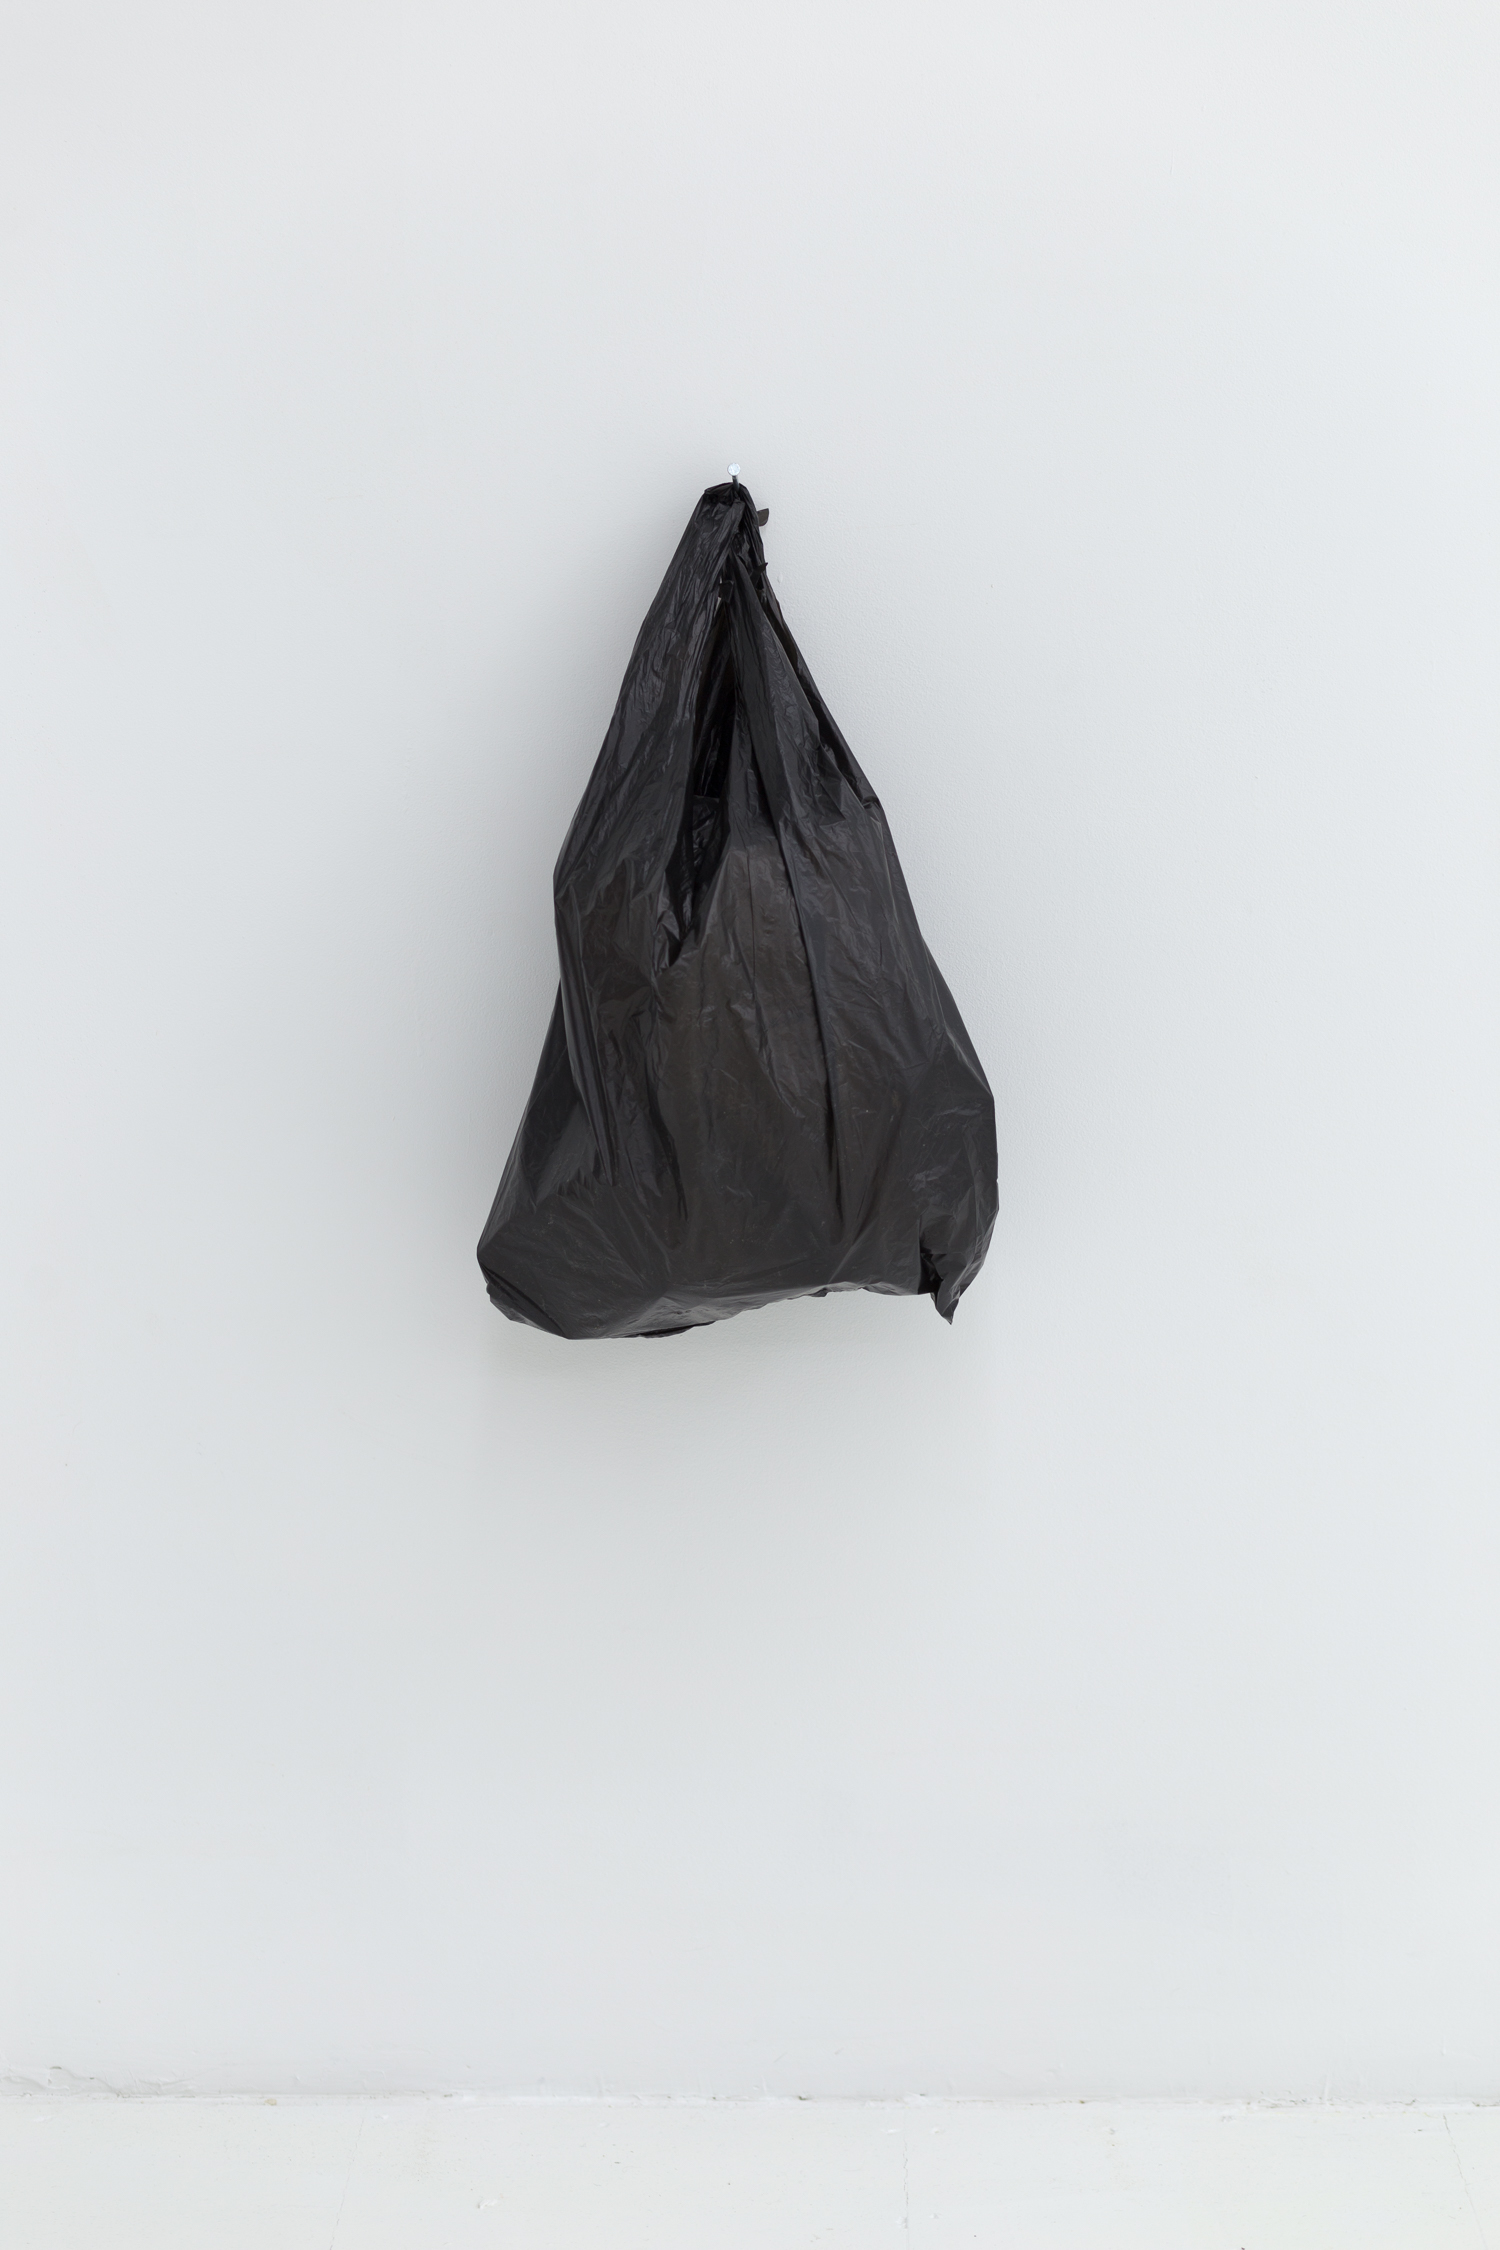 A black plastic bag hangs from a nail on a white wall